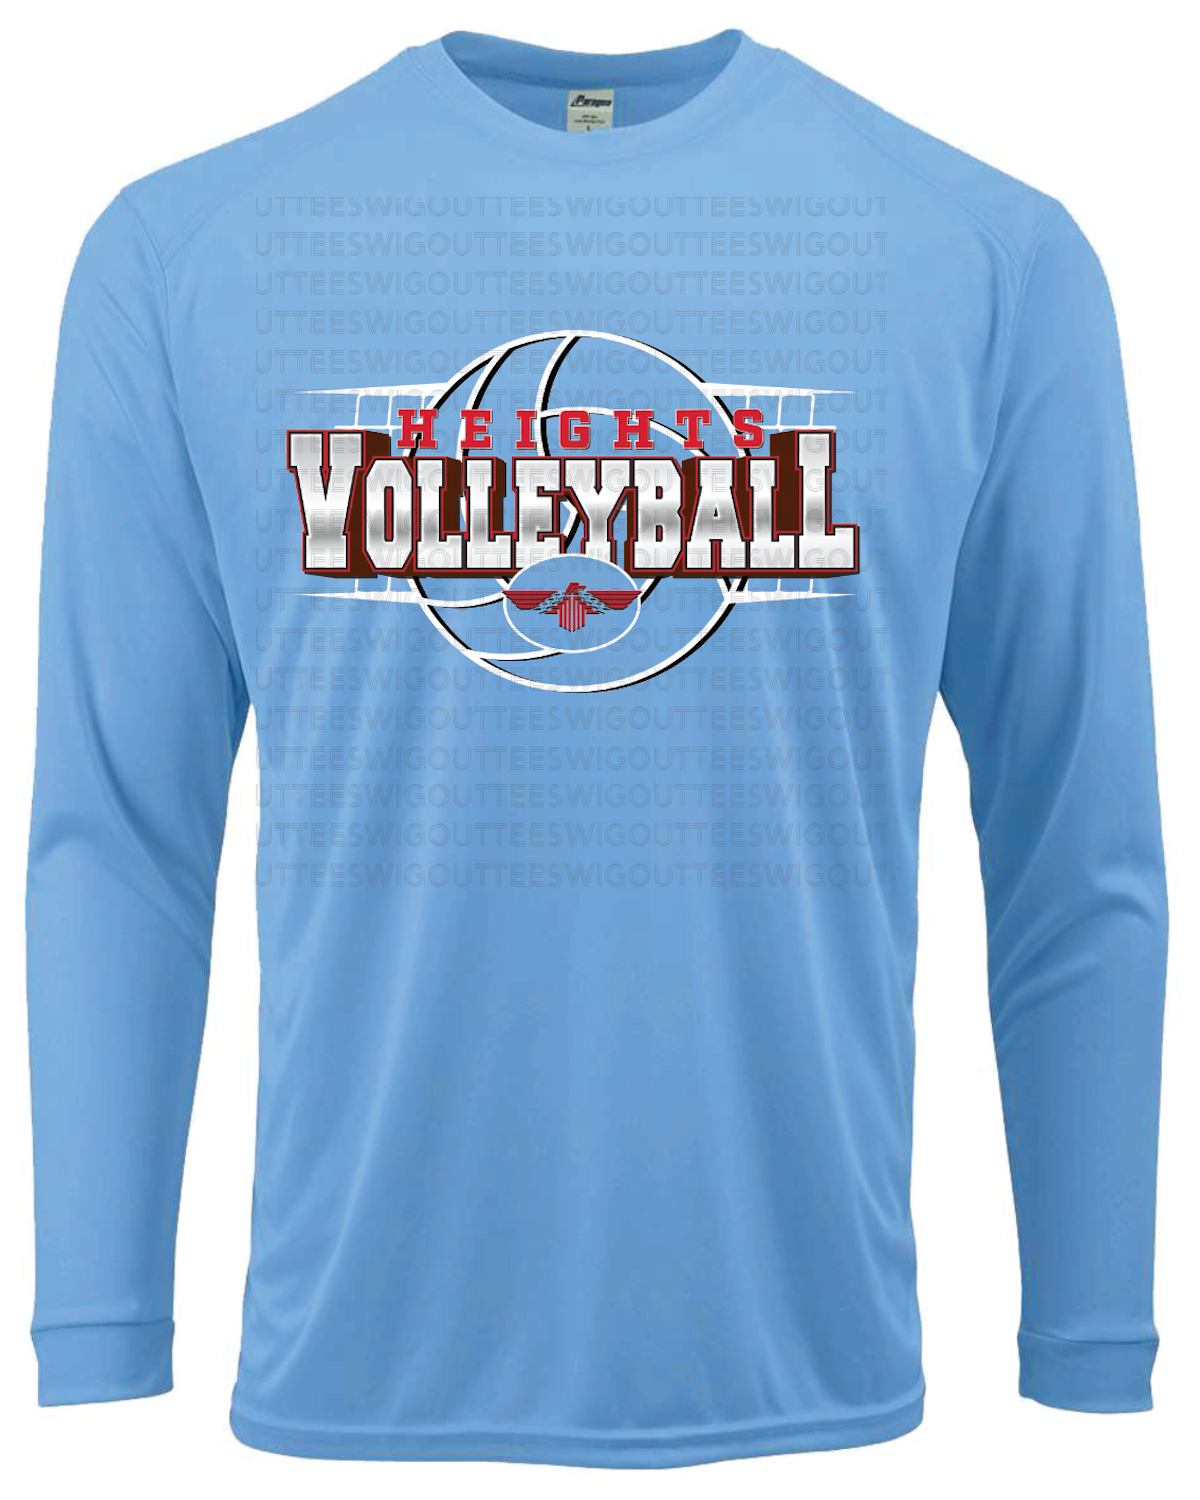 Heights Volleyball Paragon Performance Long Sleeve T-shirt